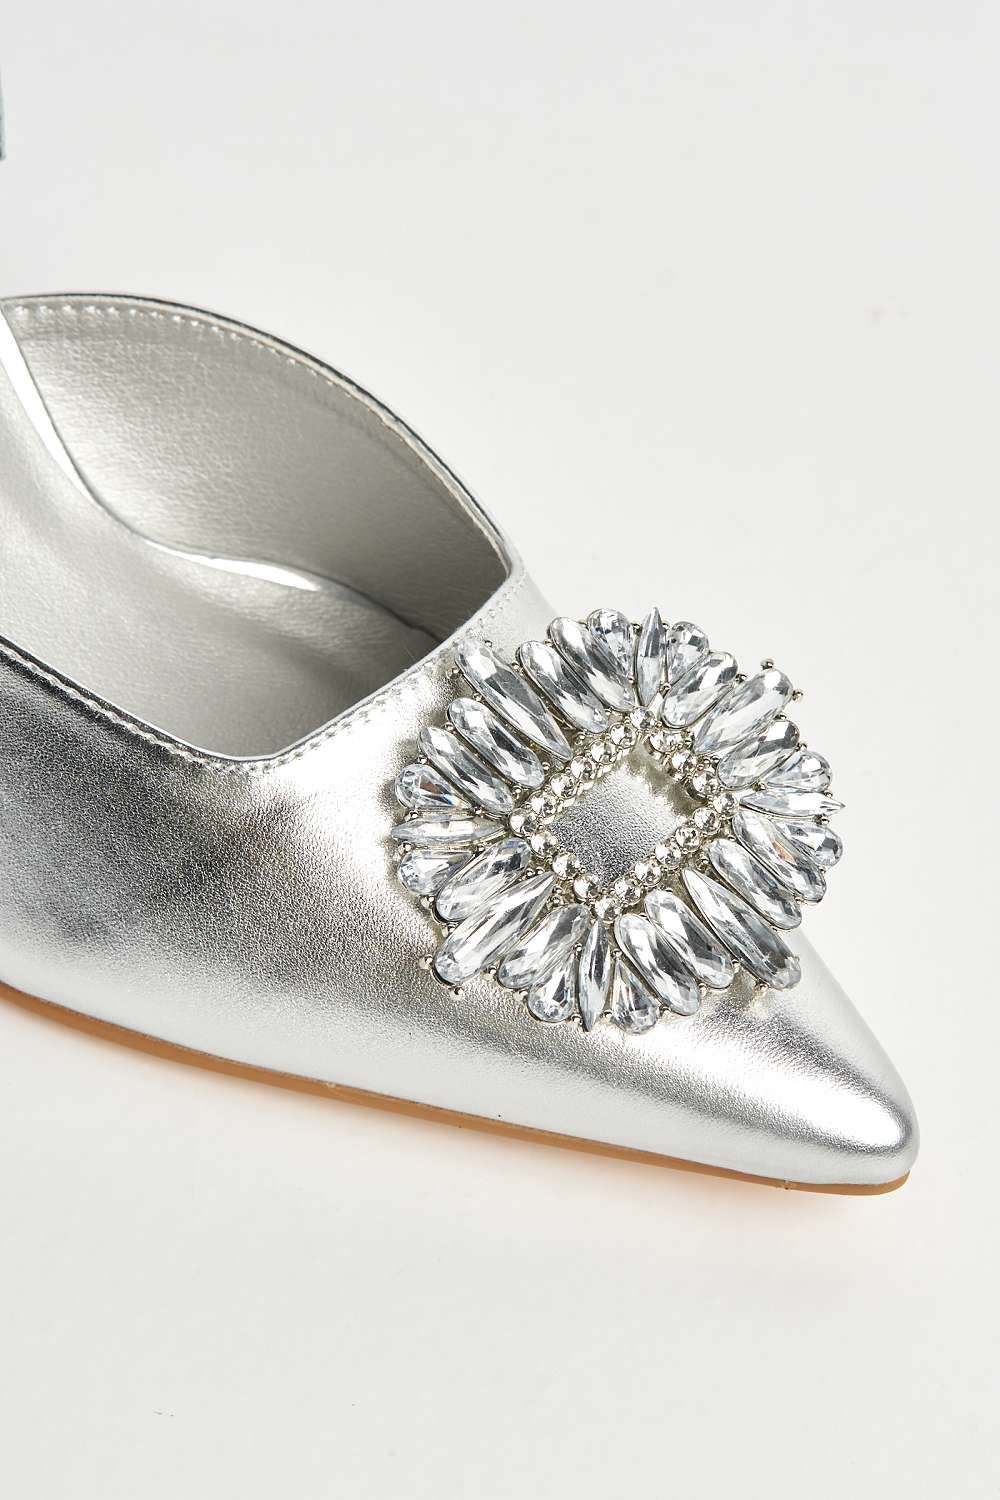 Miss Diva Amira Diamante Brooch Sling Back Court Shoes in Silver